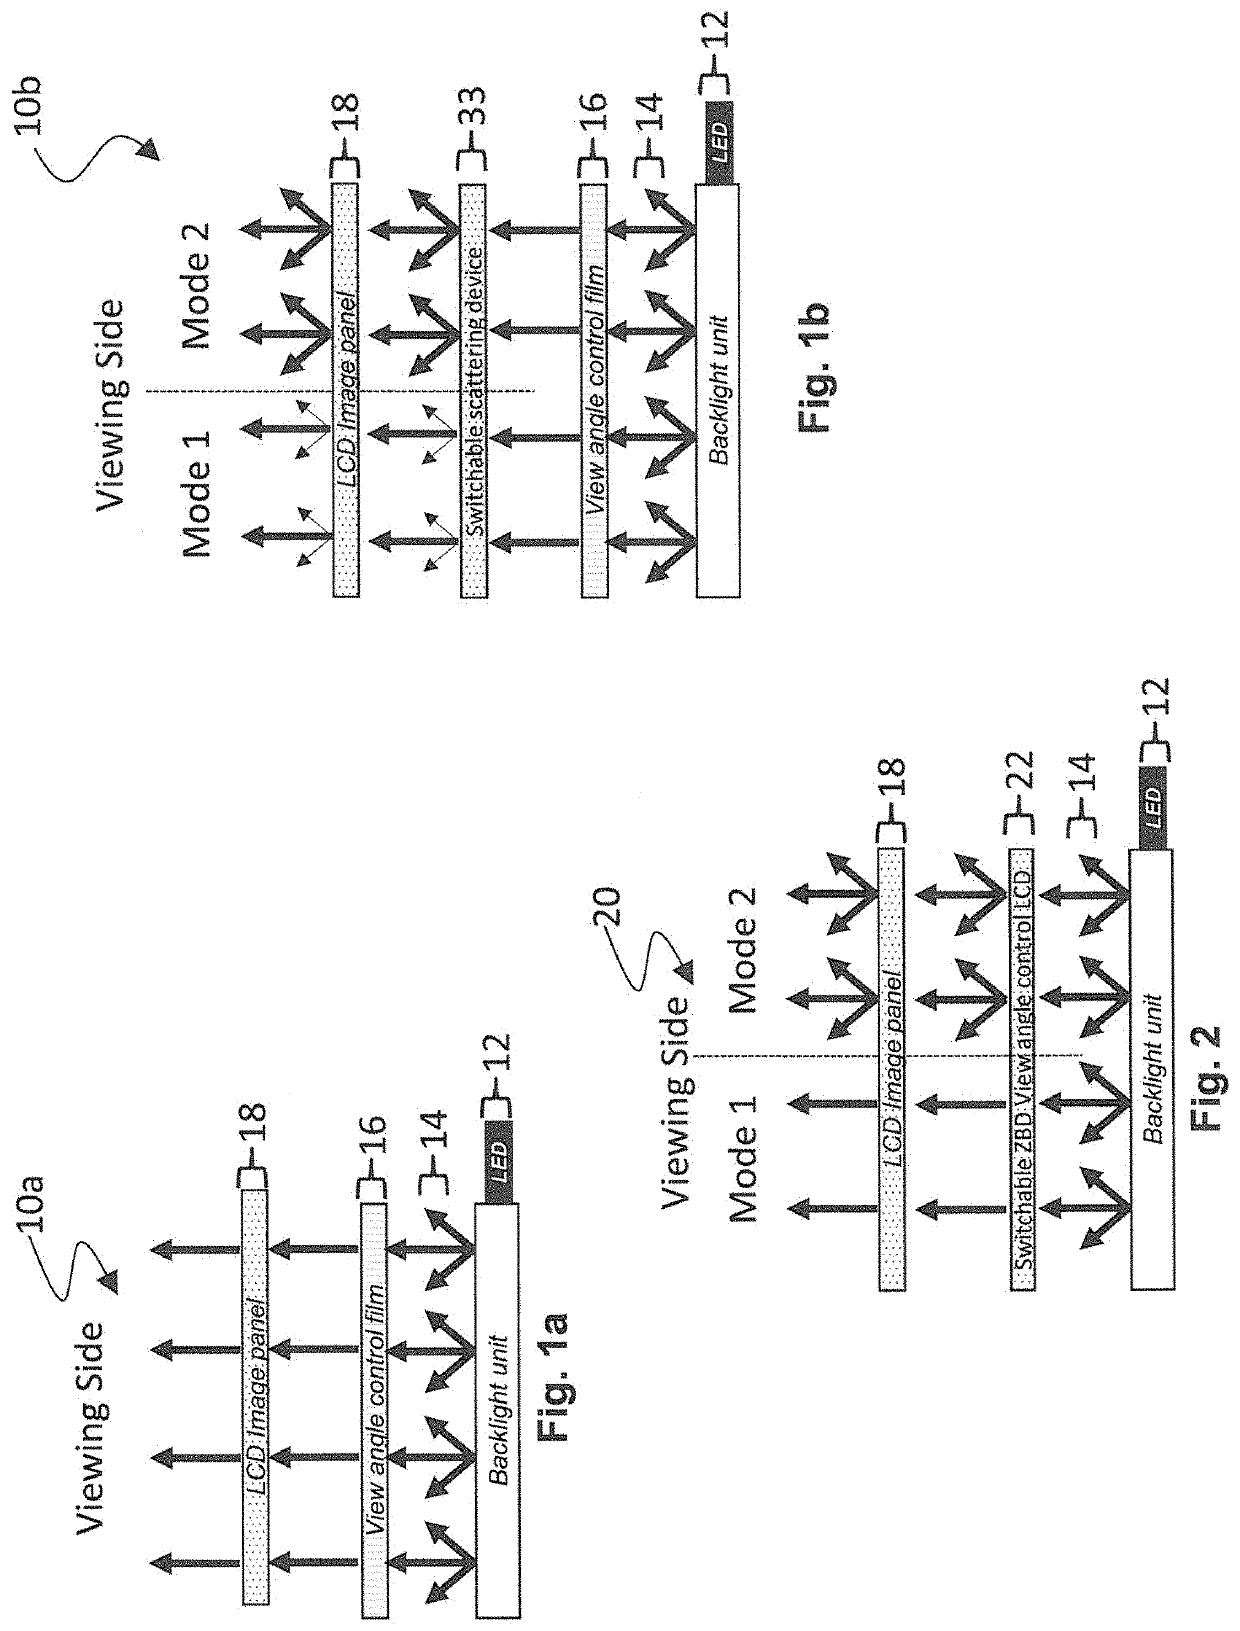 Bistable switchable liquid crystal private device